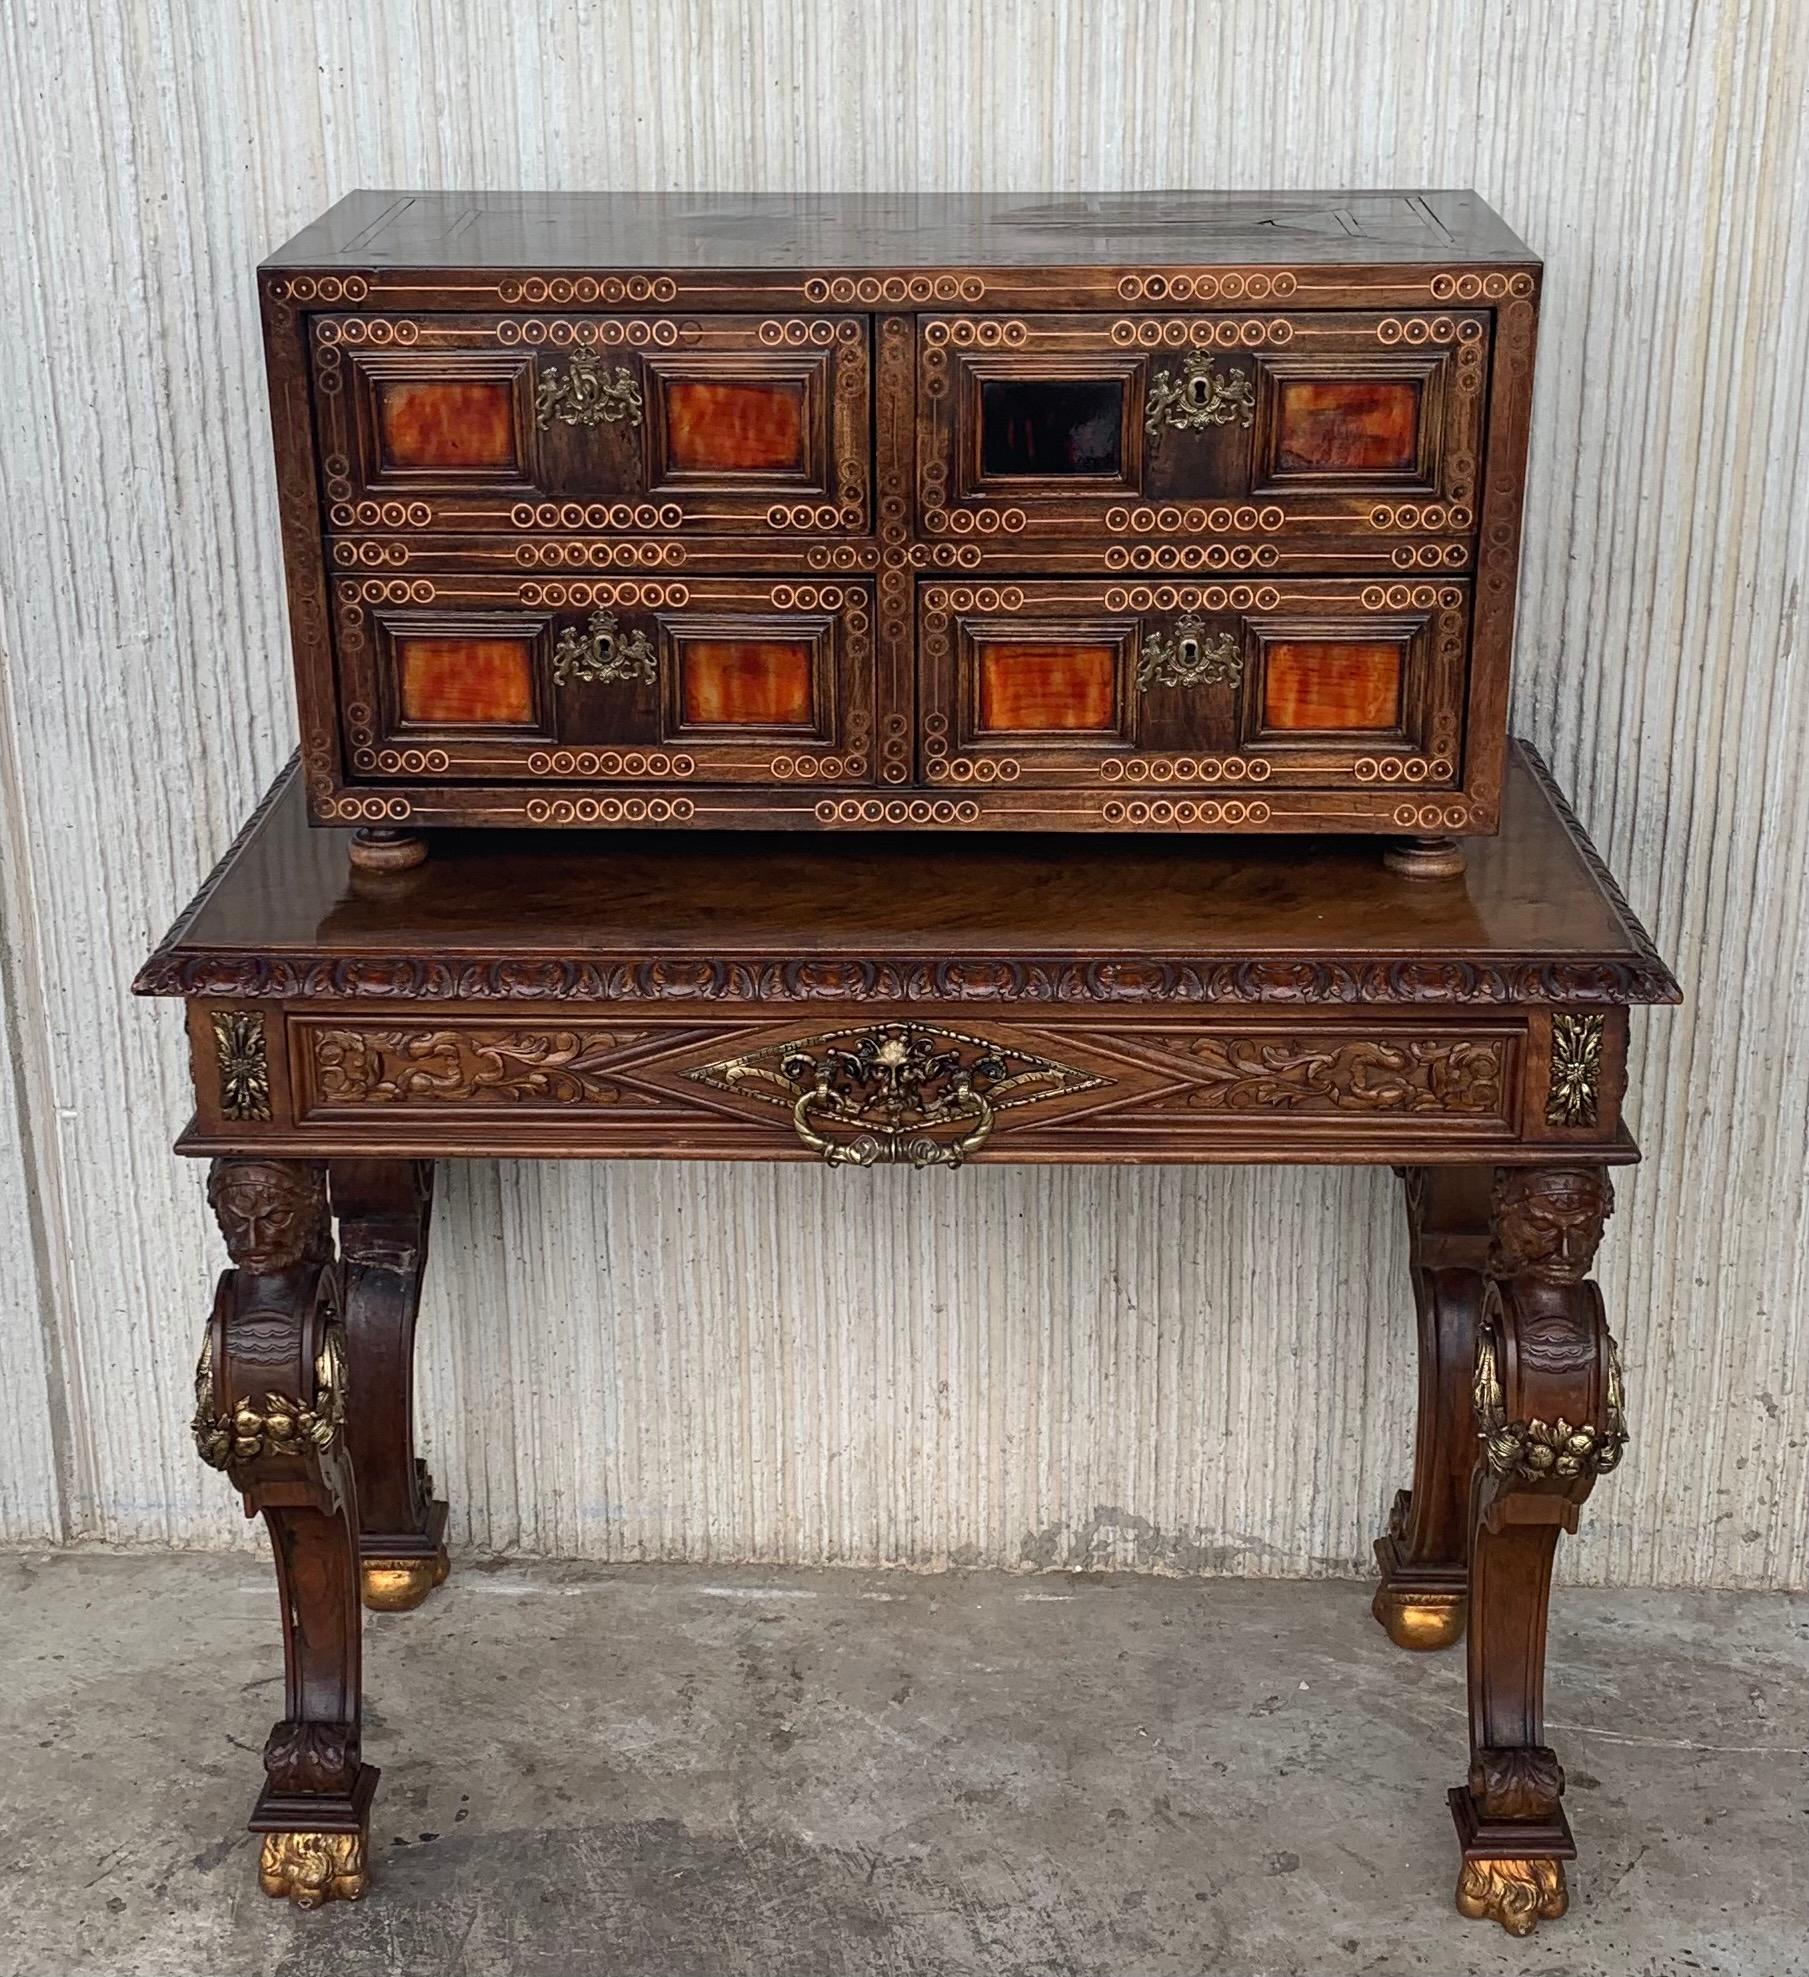 Italian cabinet on table. Walnut and rosewood, hawksbill, bronze in color and gilded, 20th century.
Sample desktop pool located on ball and claw with handles on the sides. The buffet or table that holds barguen~era is carved legs insured by lower